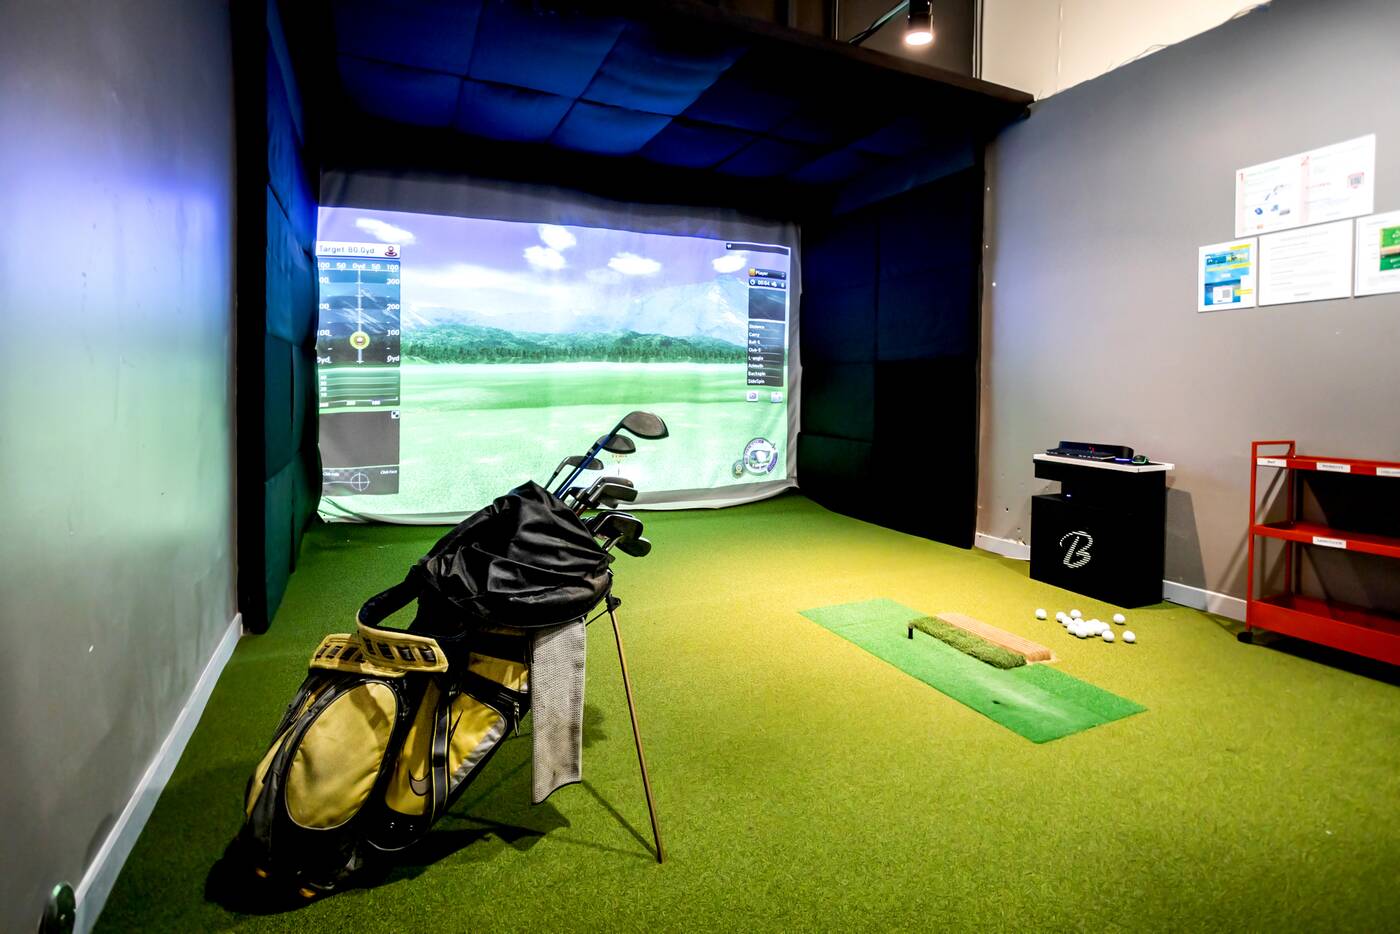 Golf enthusiasts and newbies can practice year-round at Ontario's Target  Indoor Golf